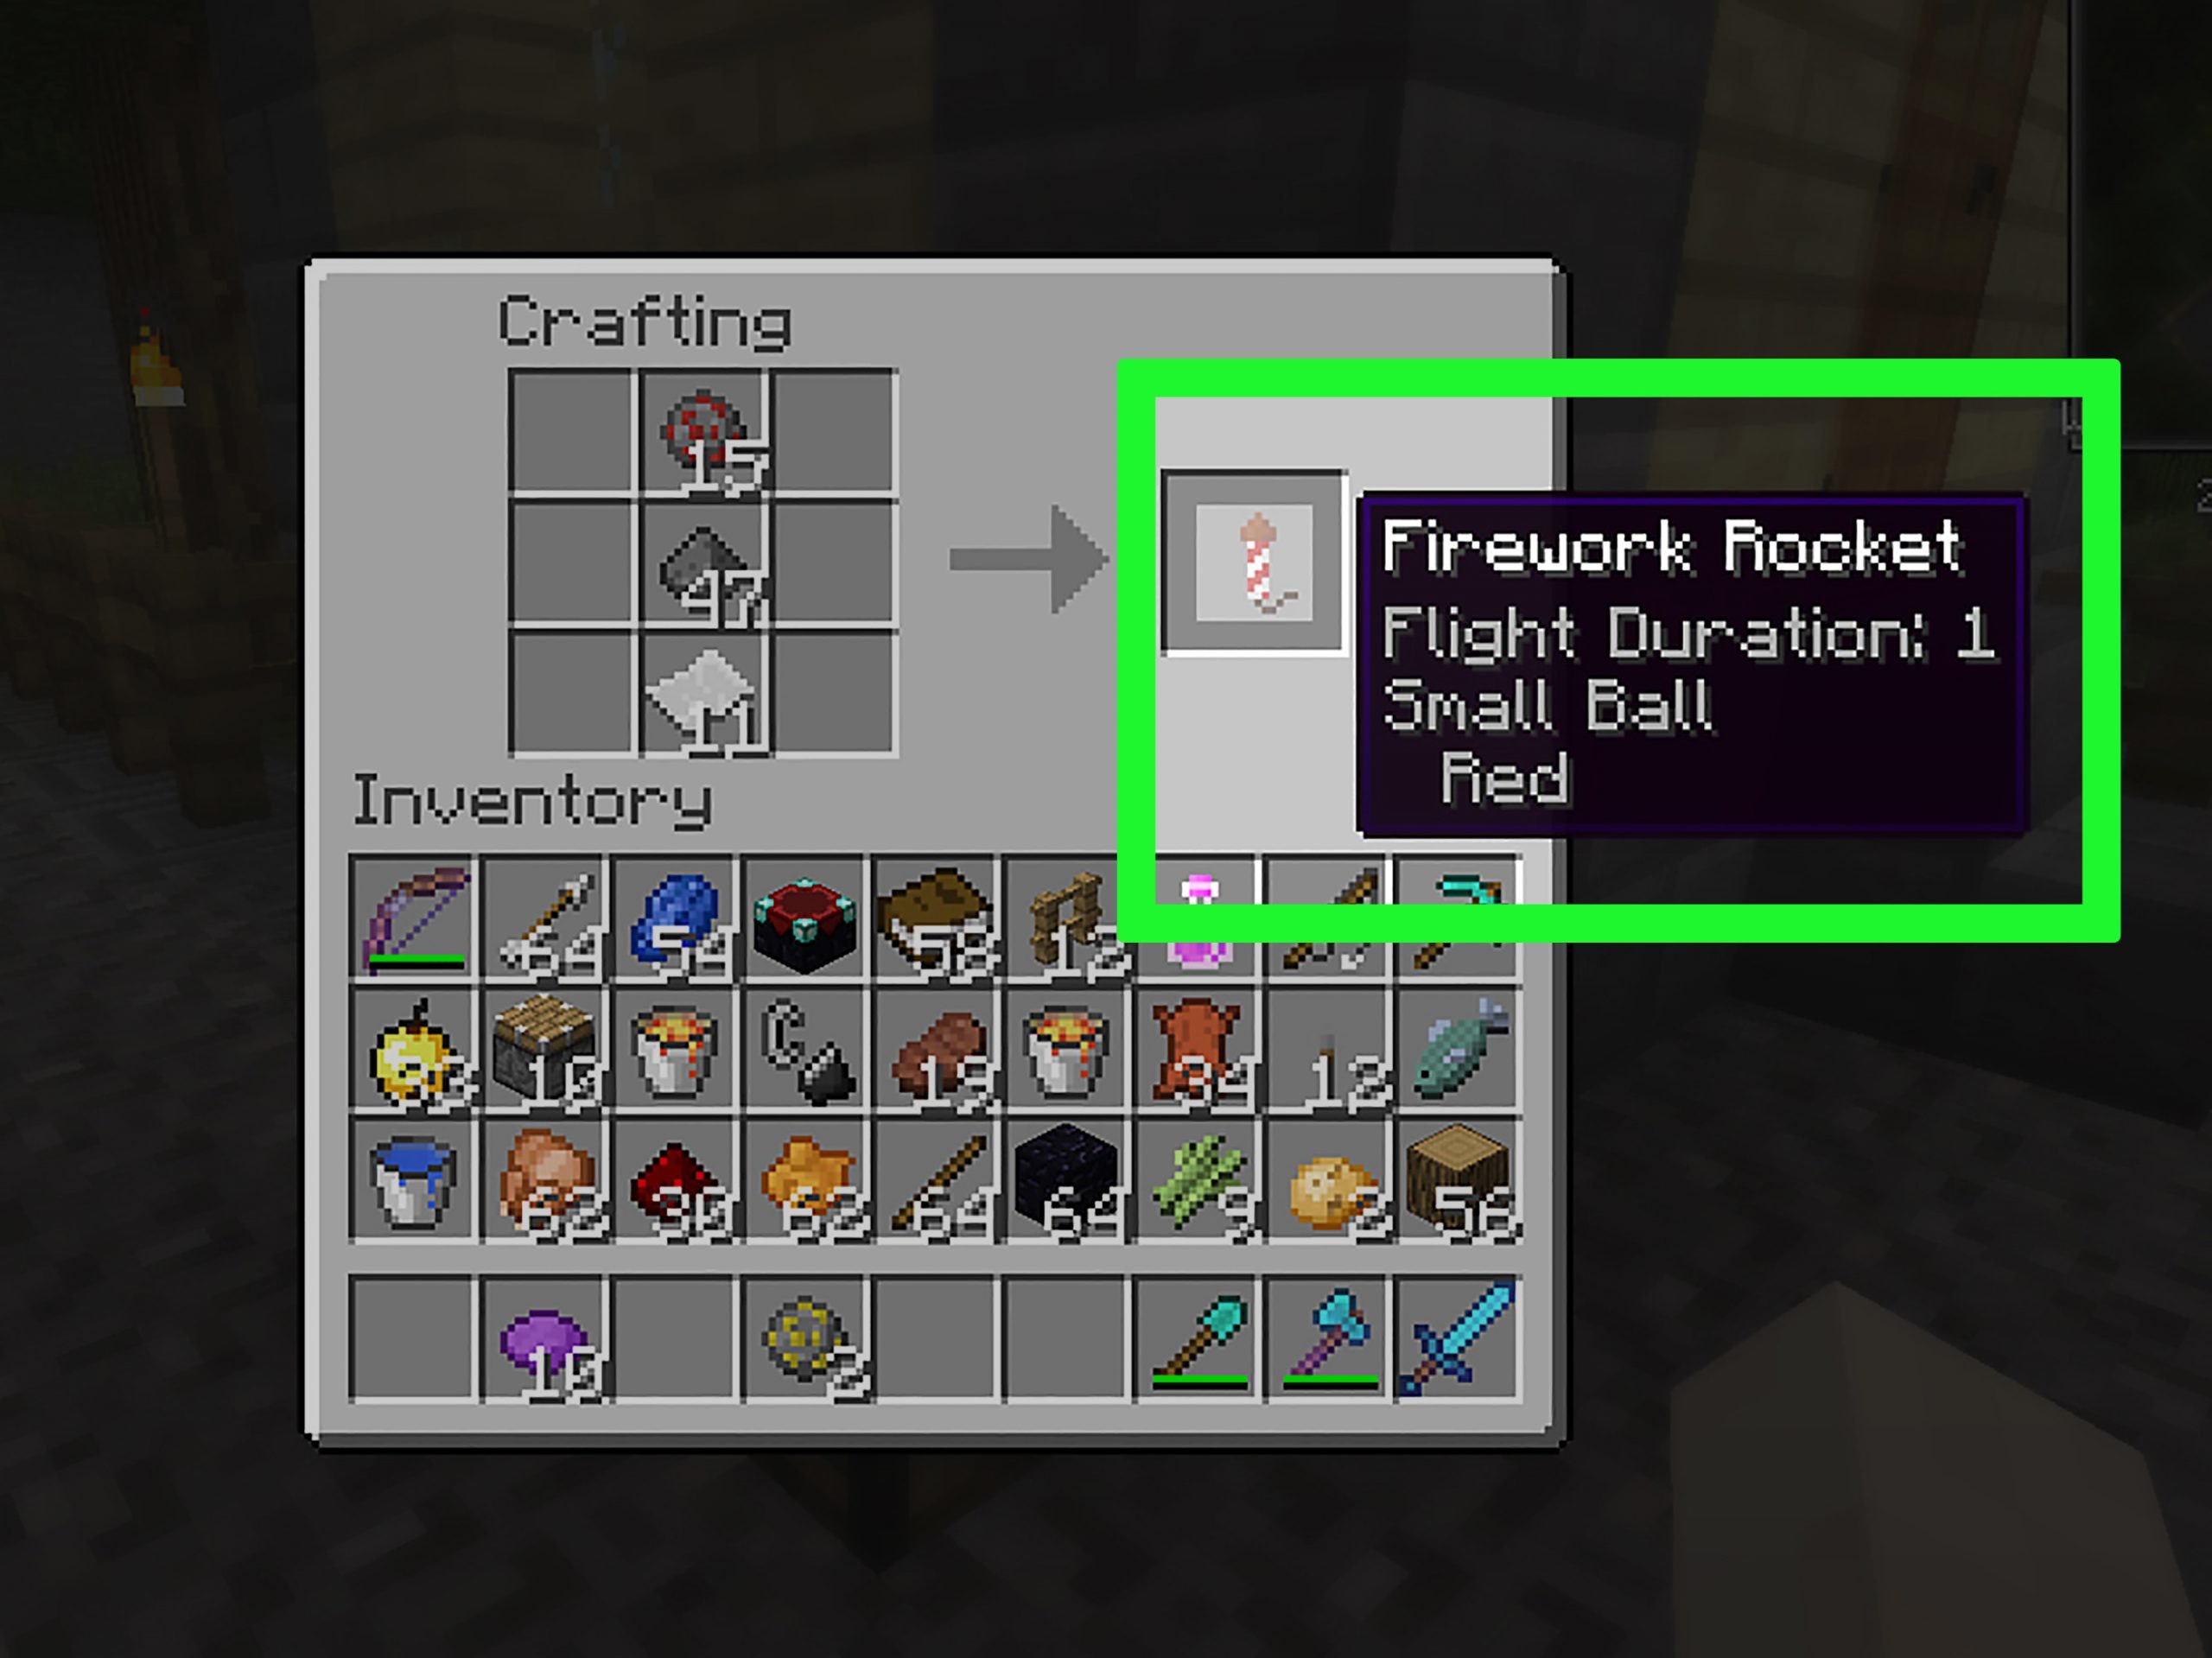 How to Make a Firework Rocket in Minecraft (with Pictures)